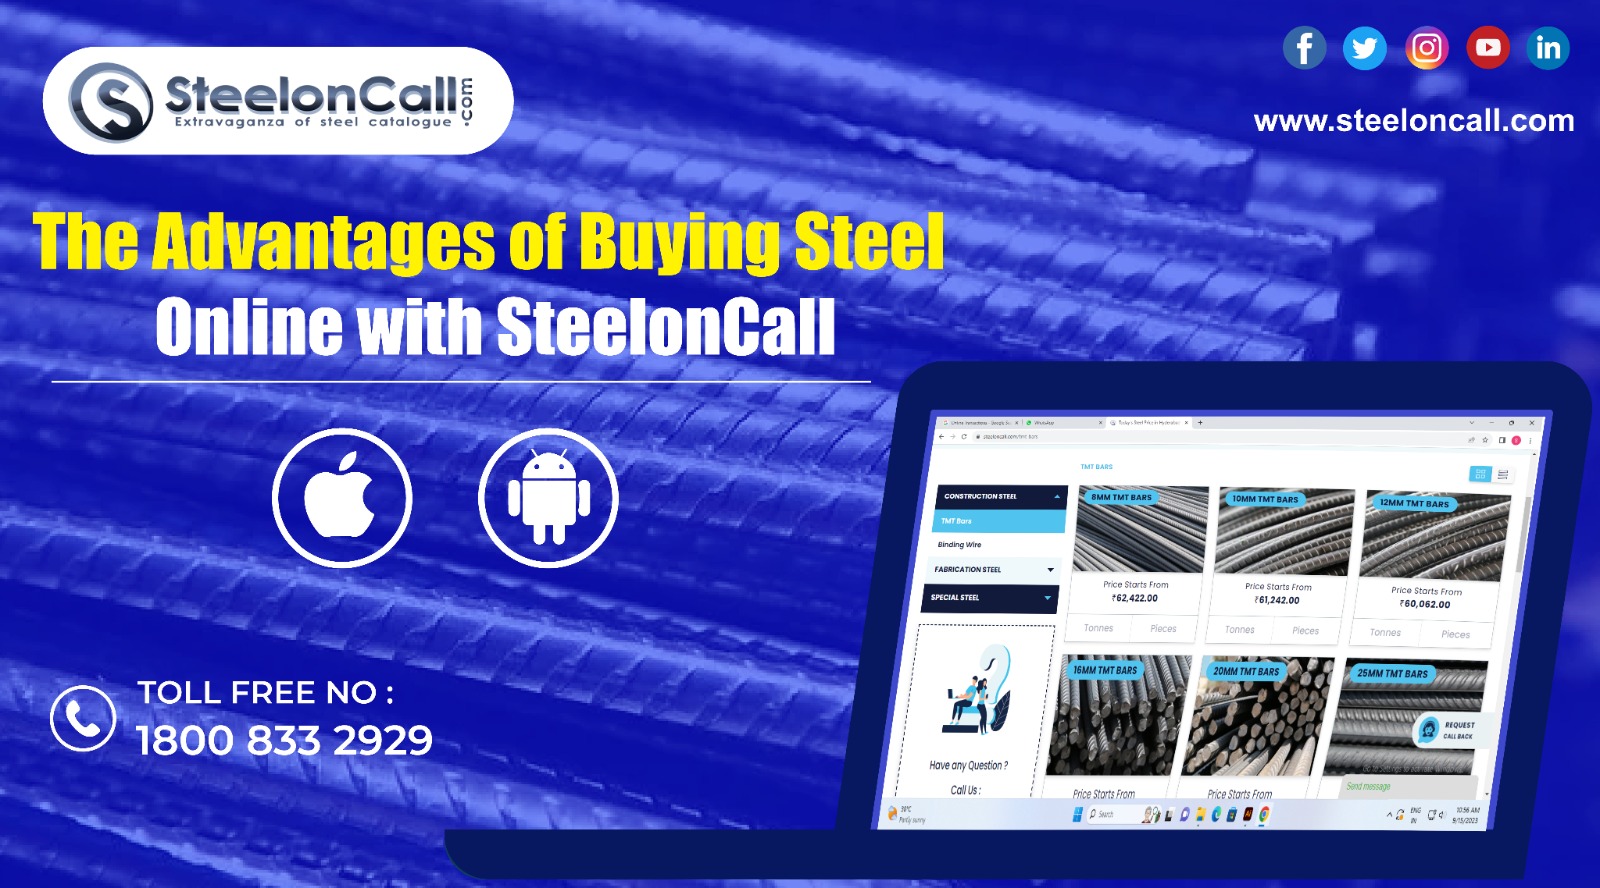 The Advantages of Buying Steel Online with SteelonCall